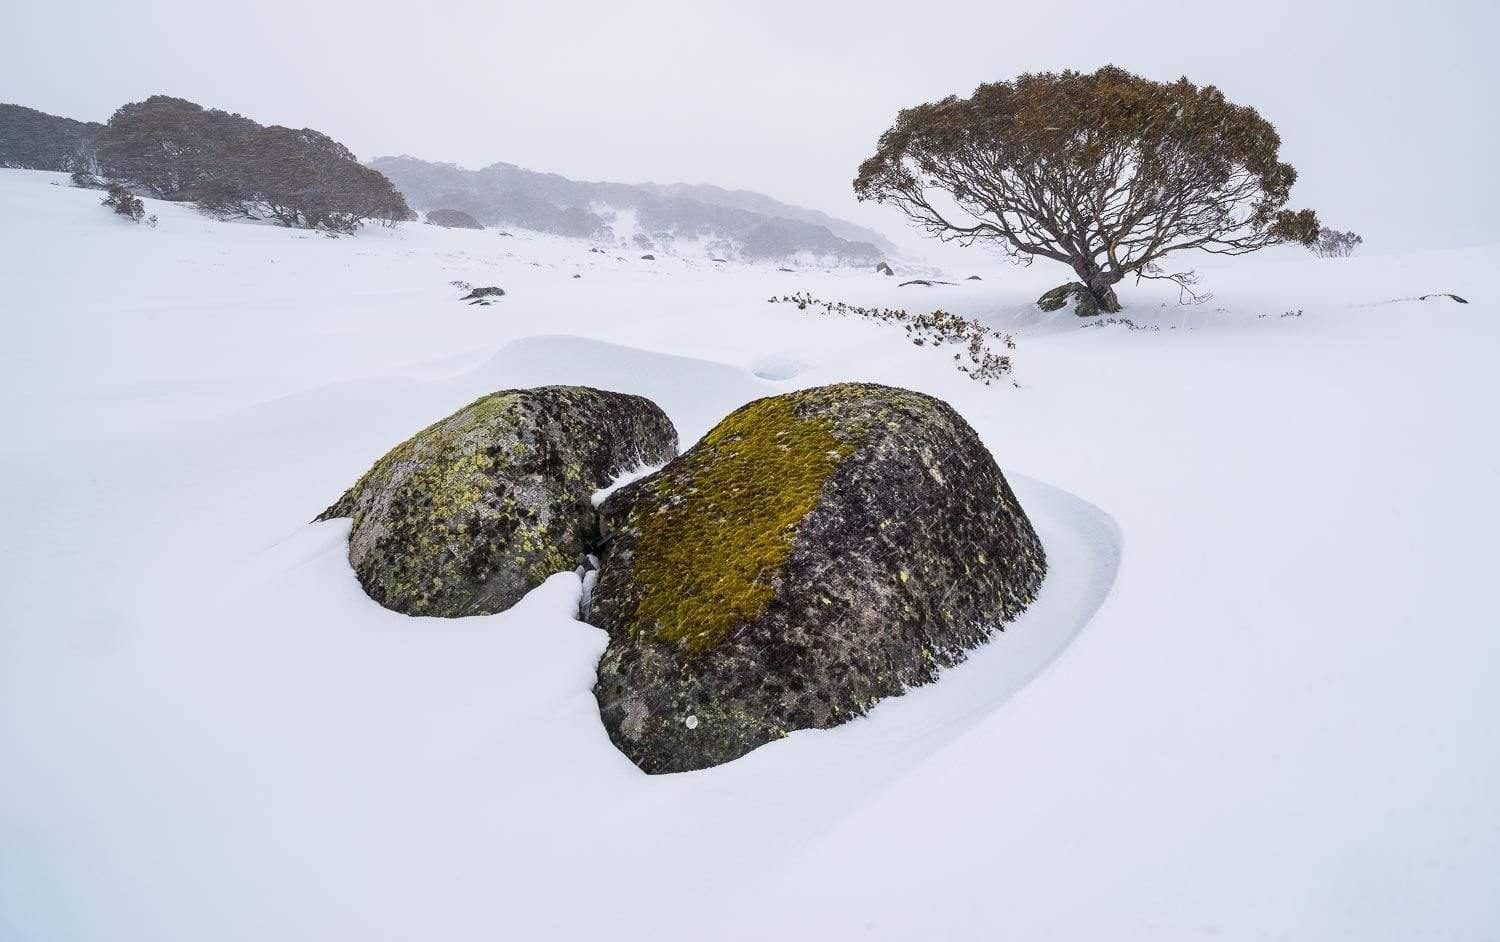 A snow-covered land with some stones and a small tree behind, Rocky Landscape